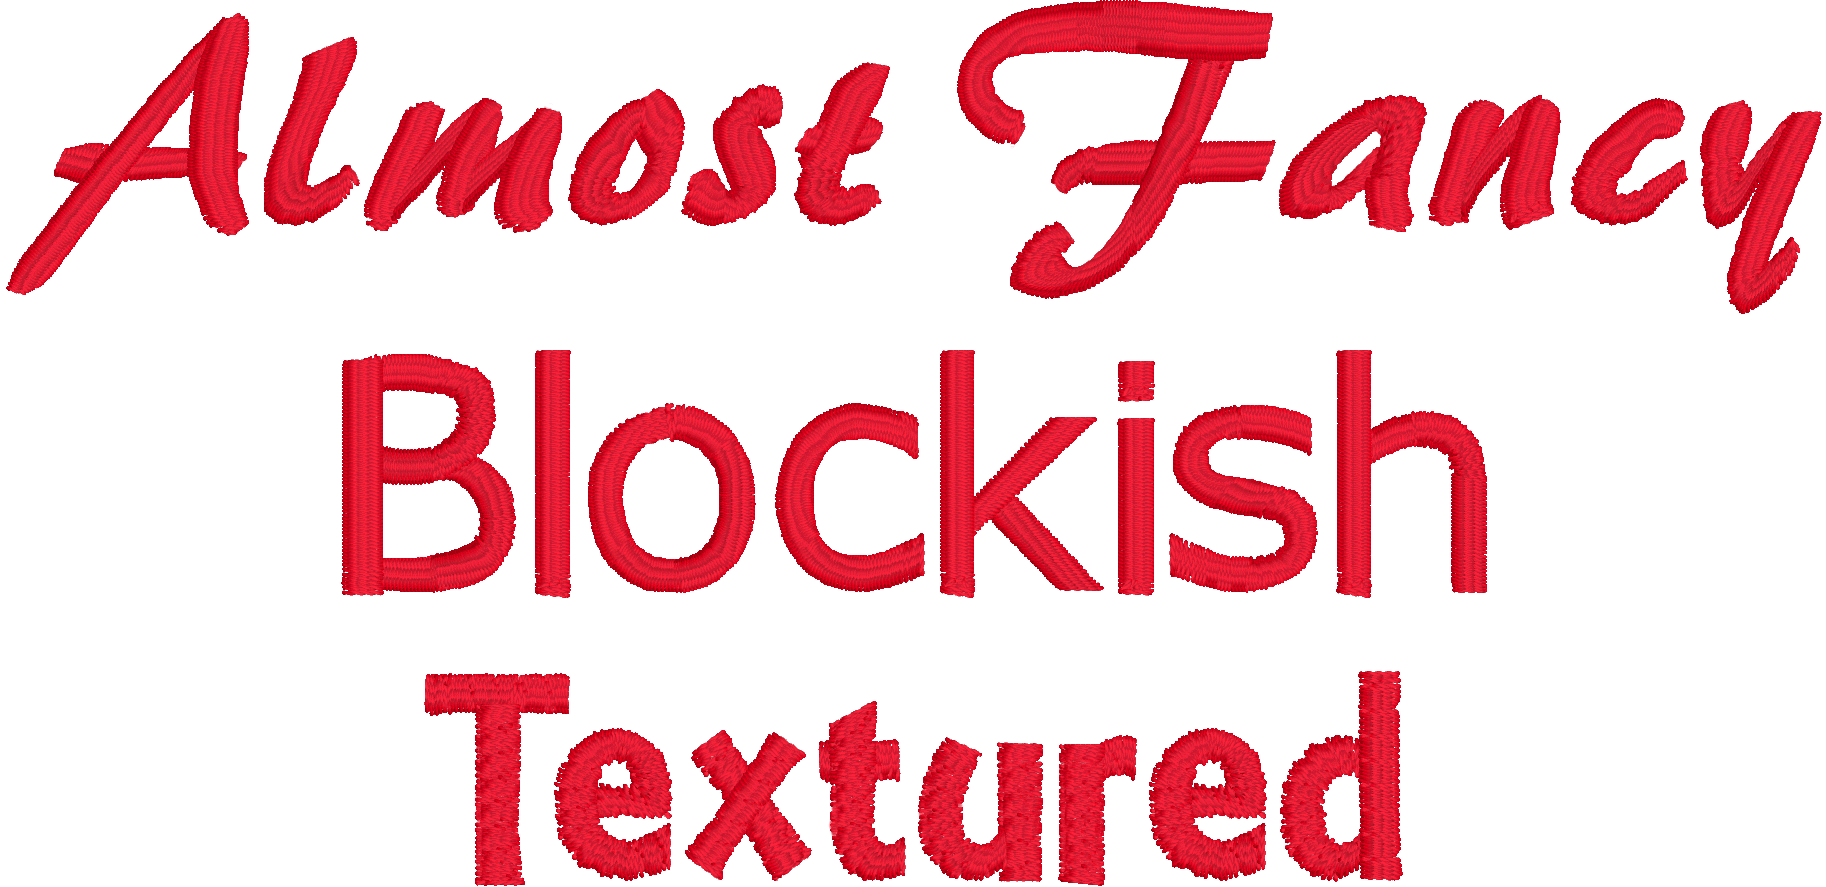 3 Free Embroidery fonts in BX format from Jim and Embrilliance!